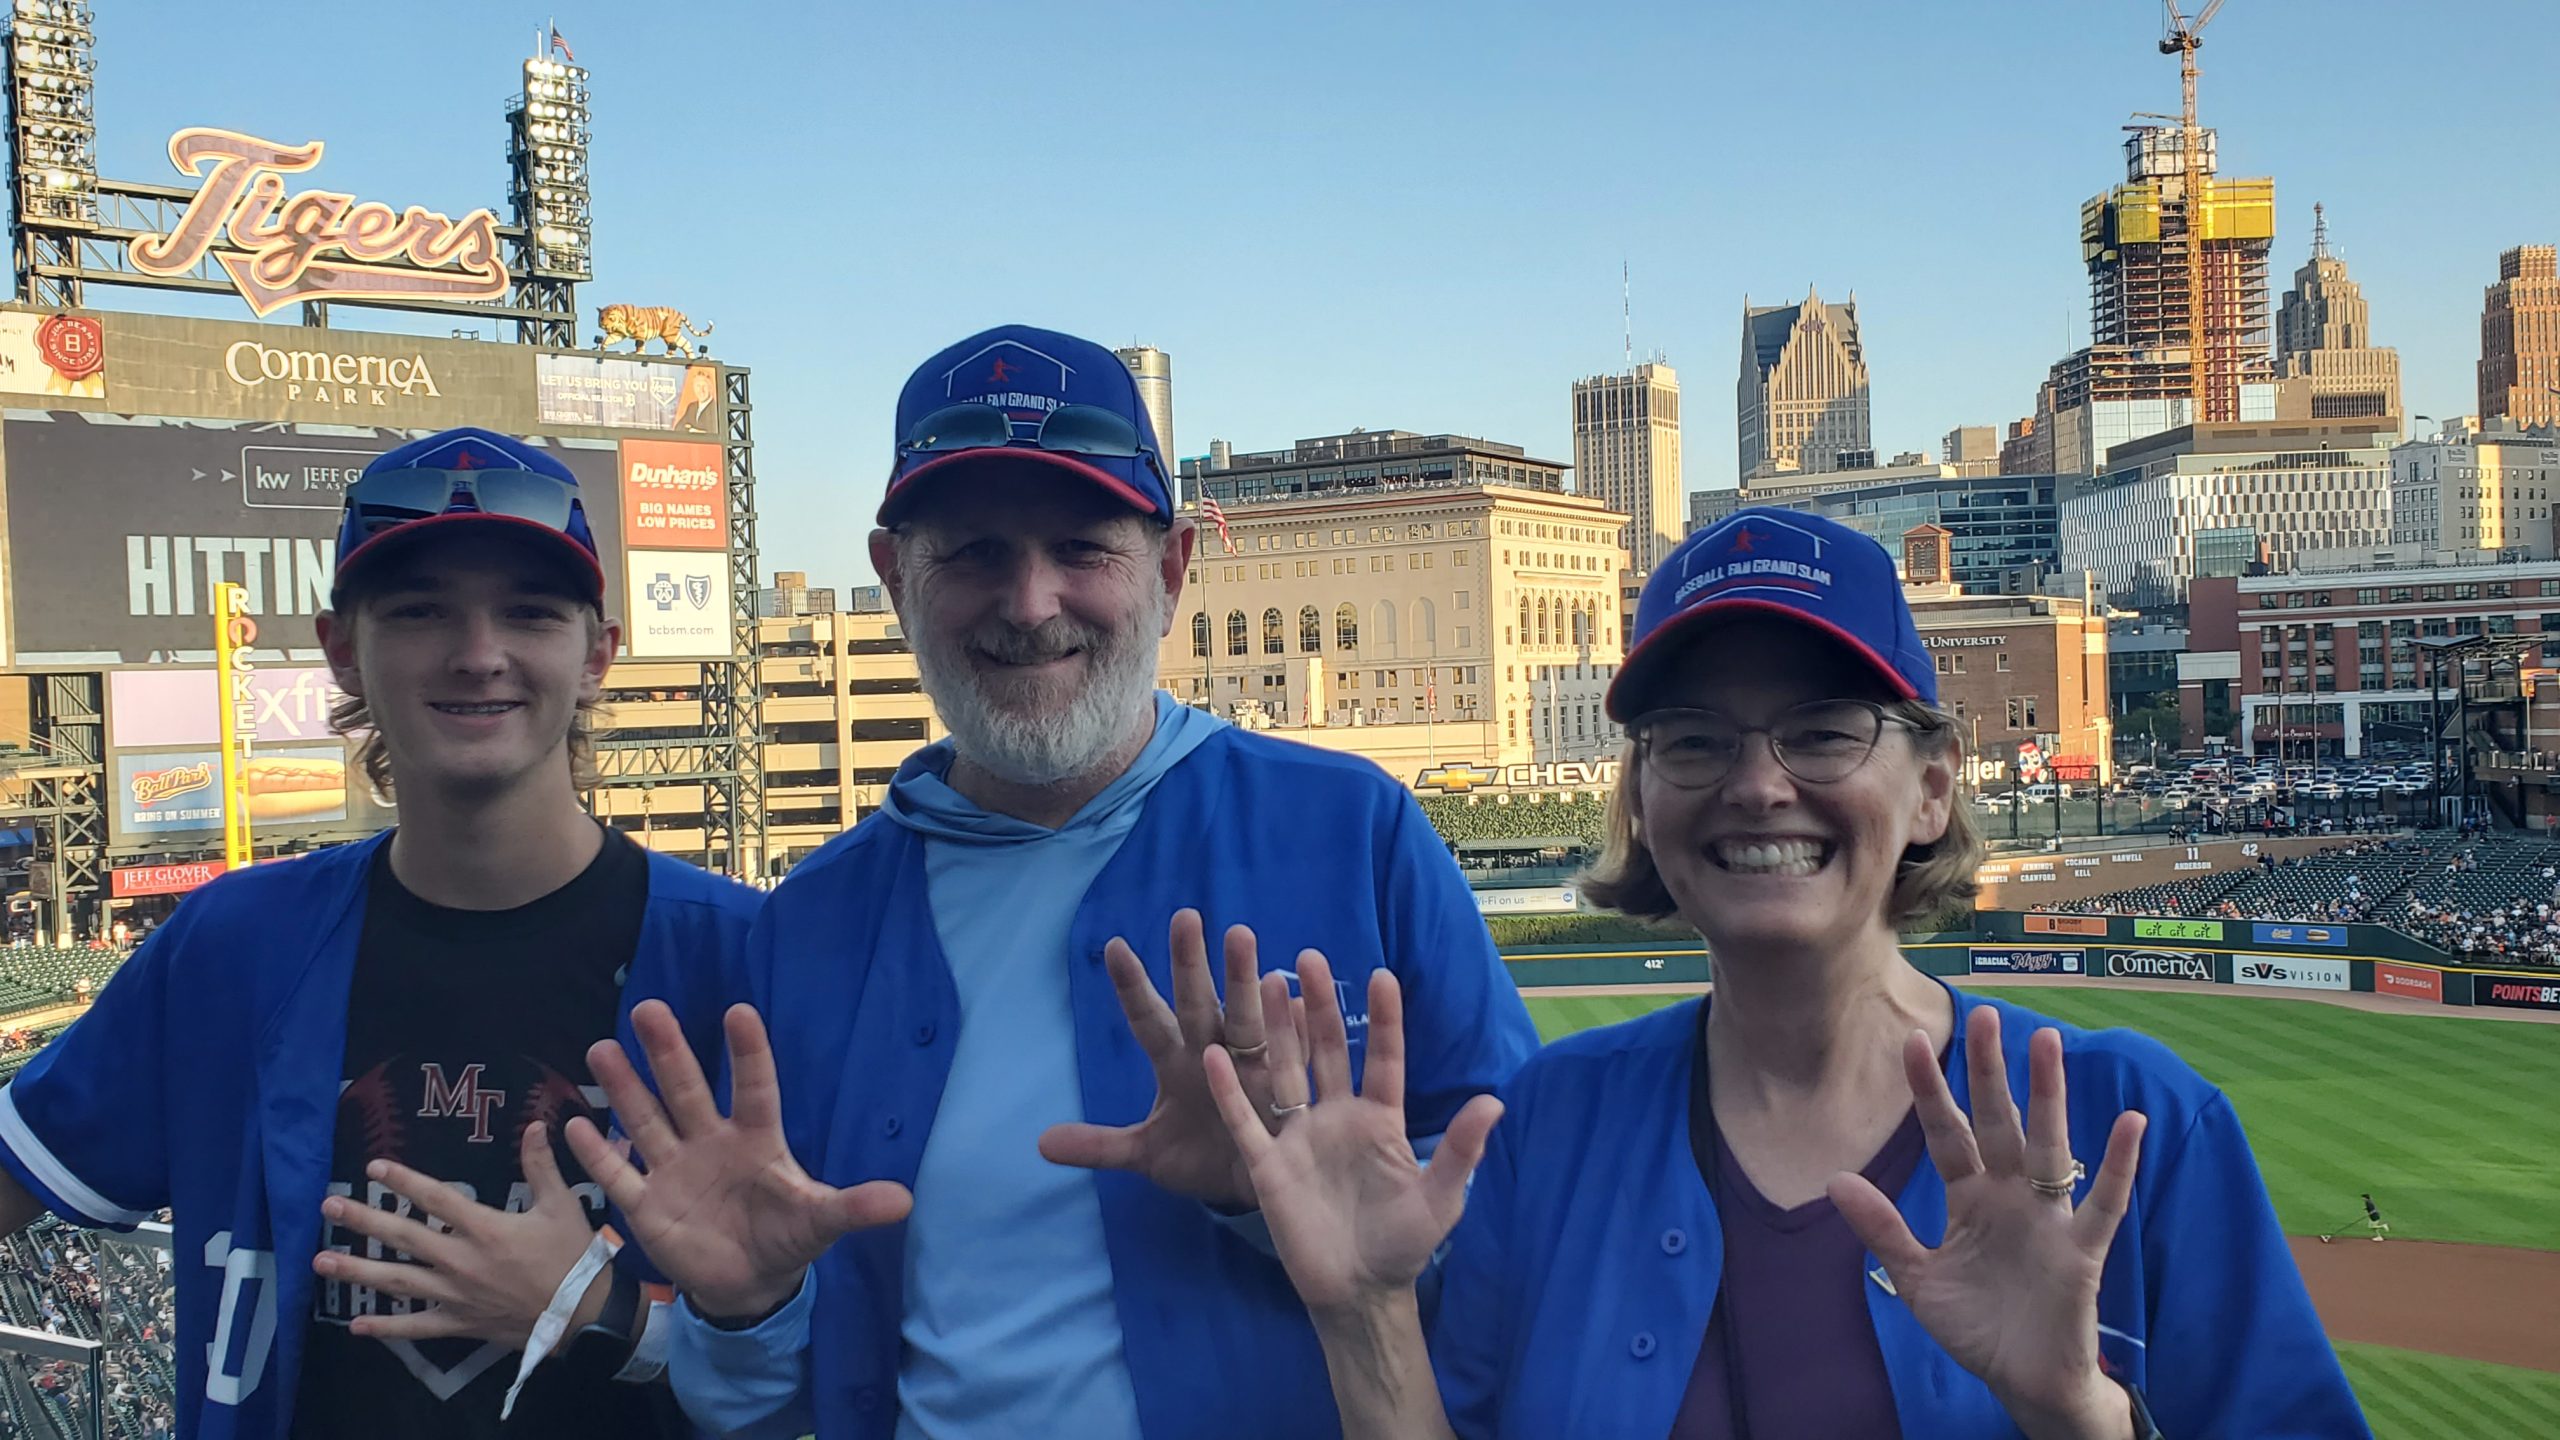 Heather, Brad, and Ryan at Comerica Park with 25 fingers in the air!